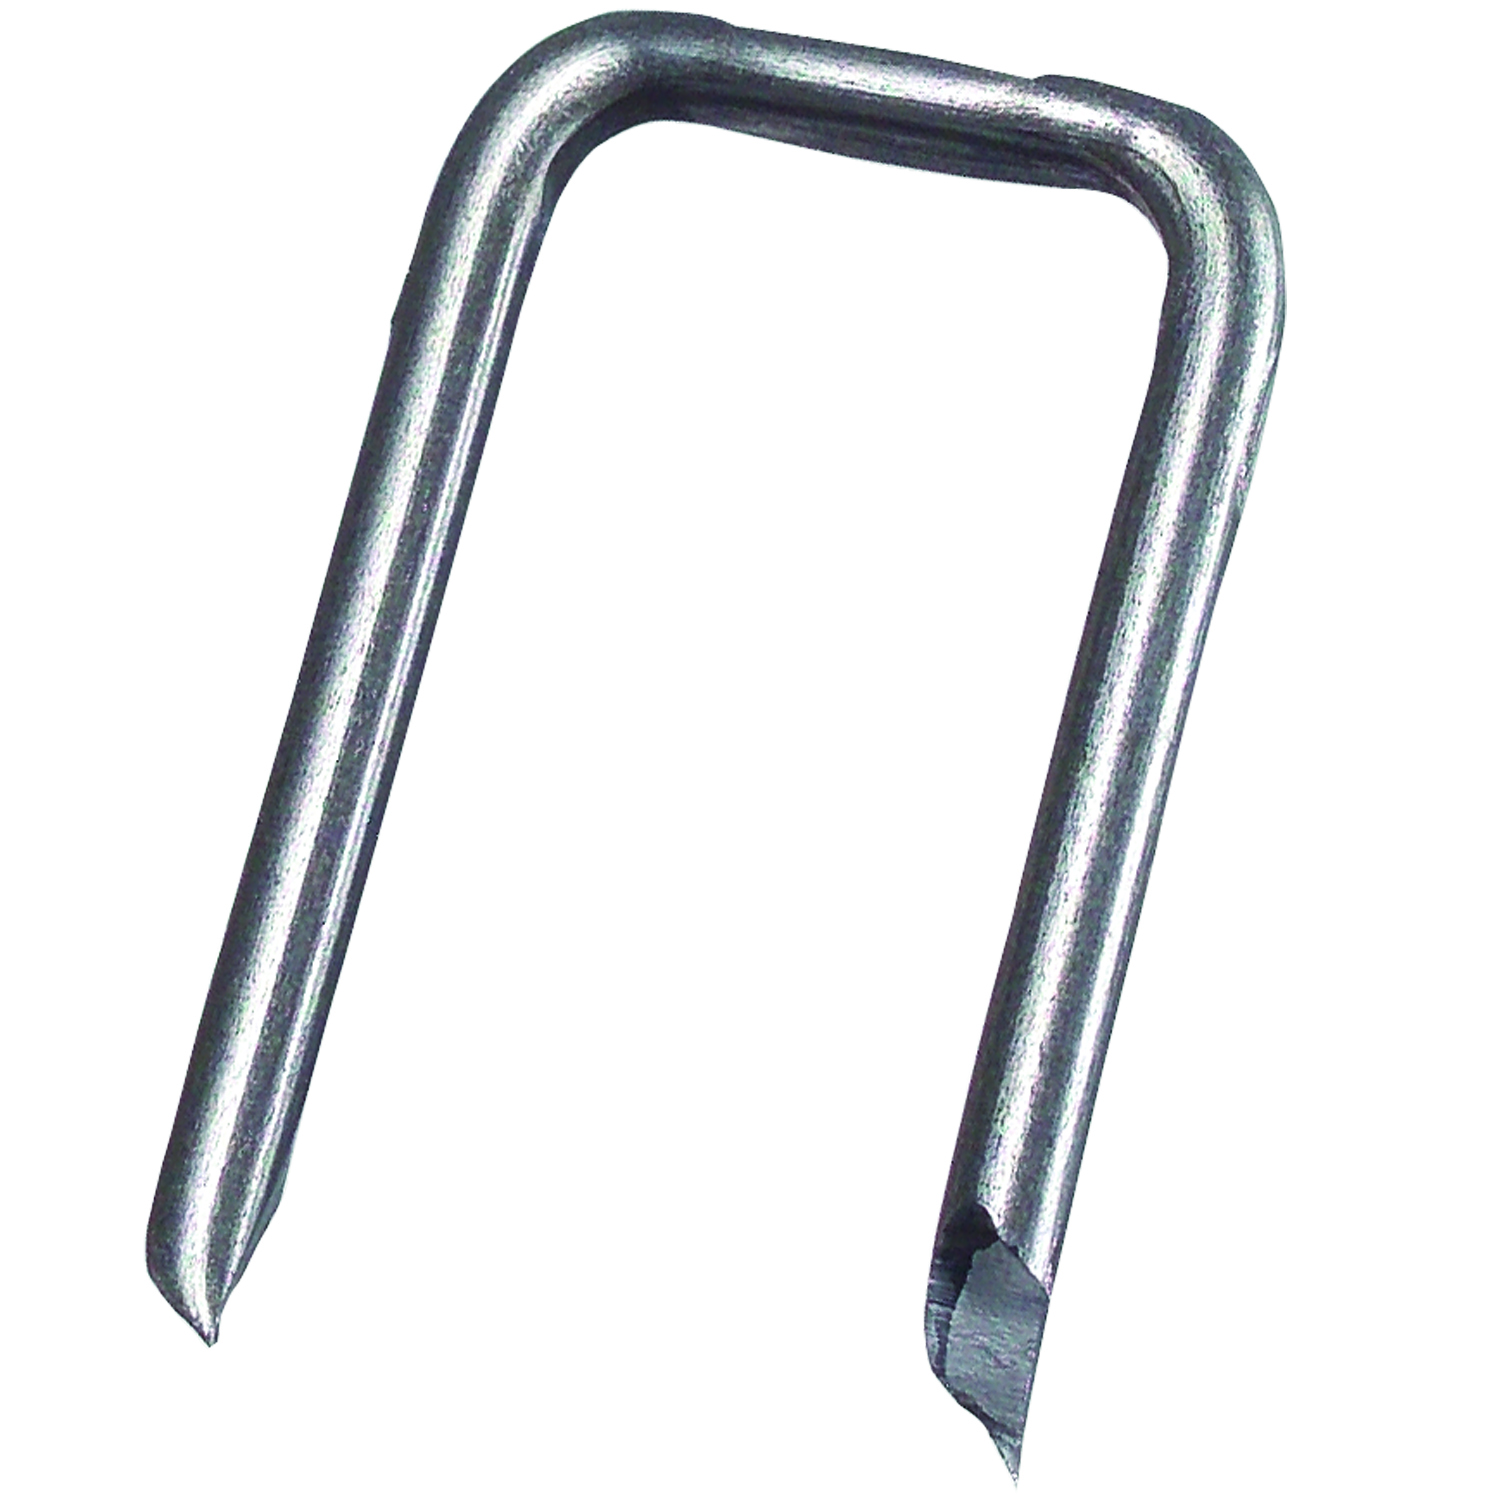 Stainless Steel 316 1 x 3 1/8 Bolt Snap Square Swivel End Marine Grade  Polished - US Stainless